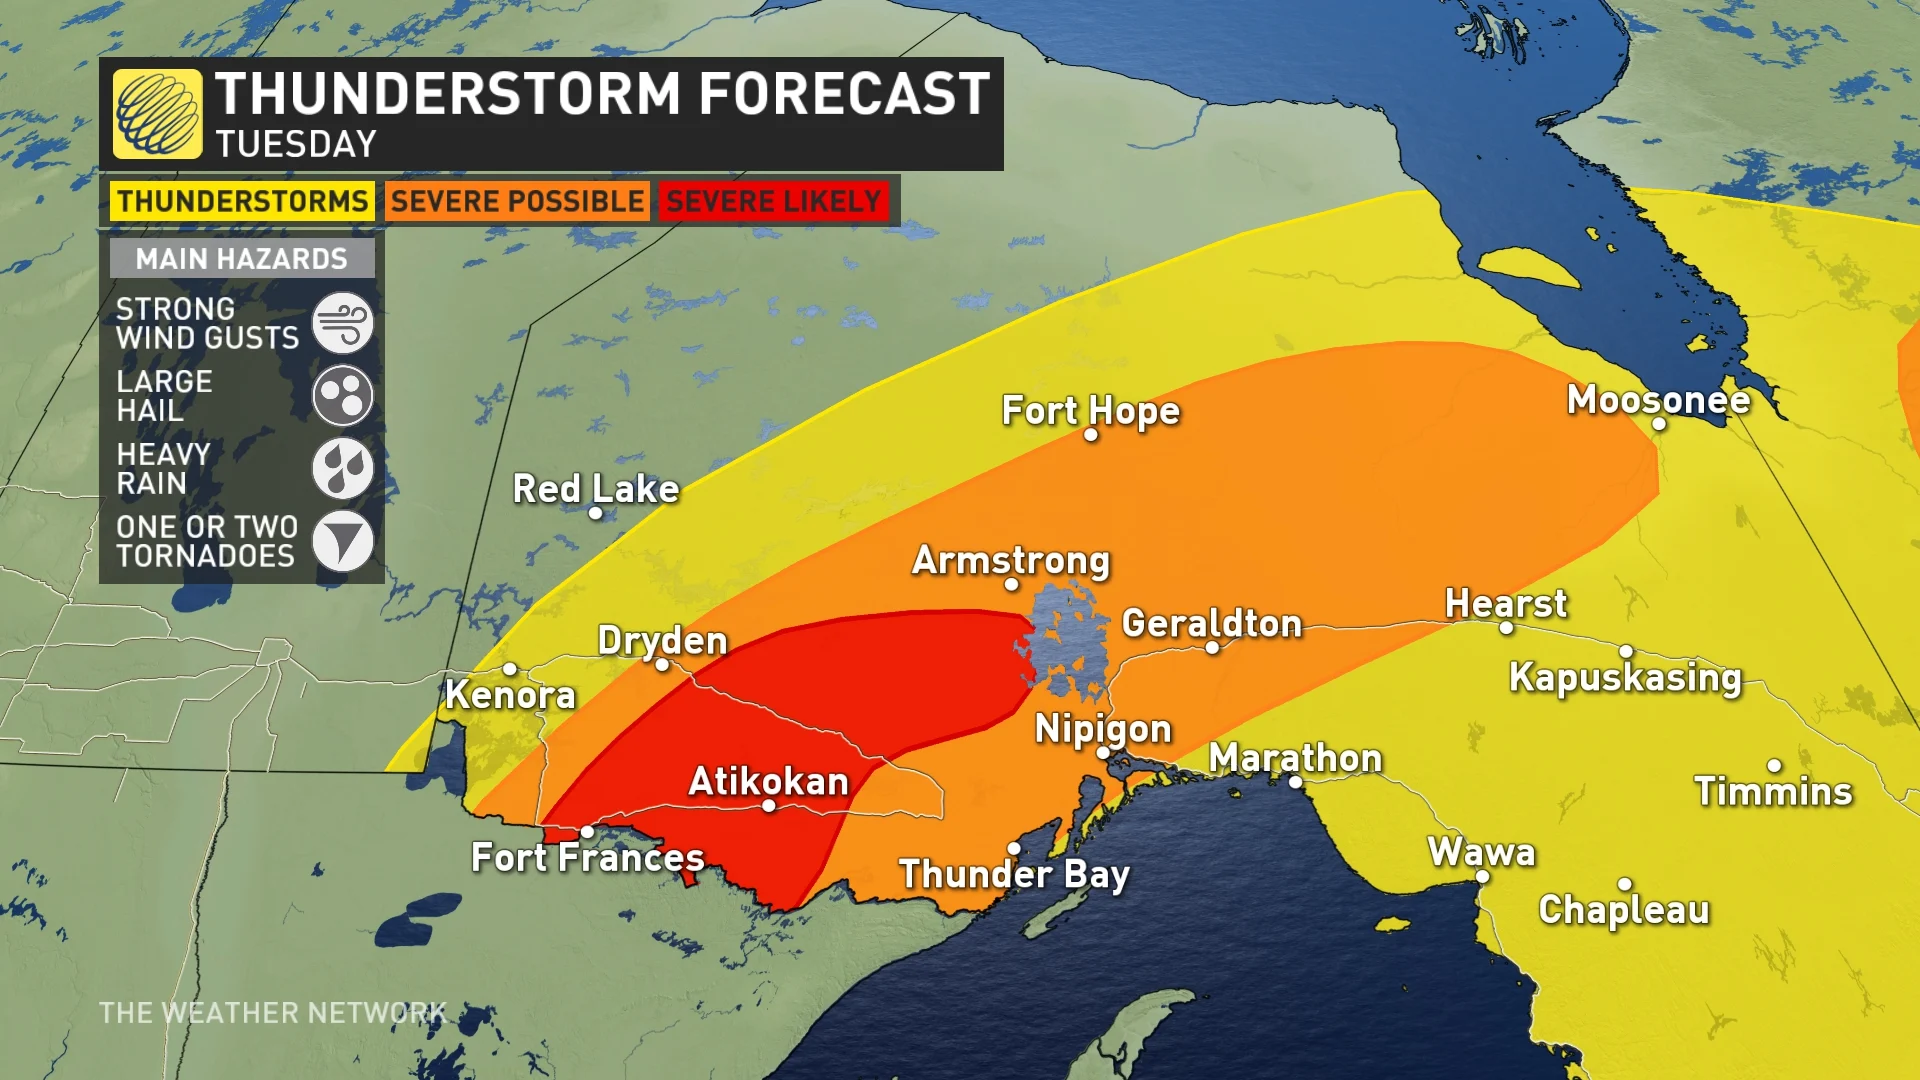 Baron - NW Ont severe storm risk Tuesday - June 18